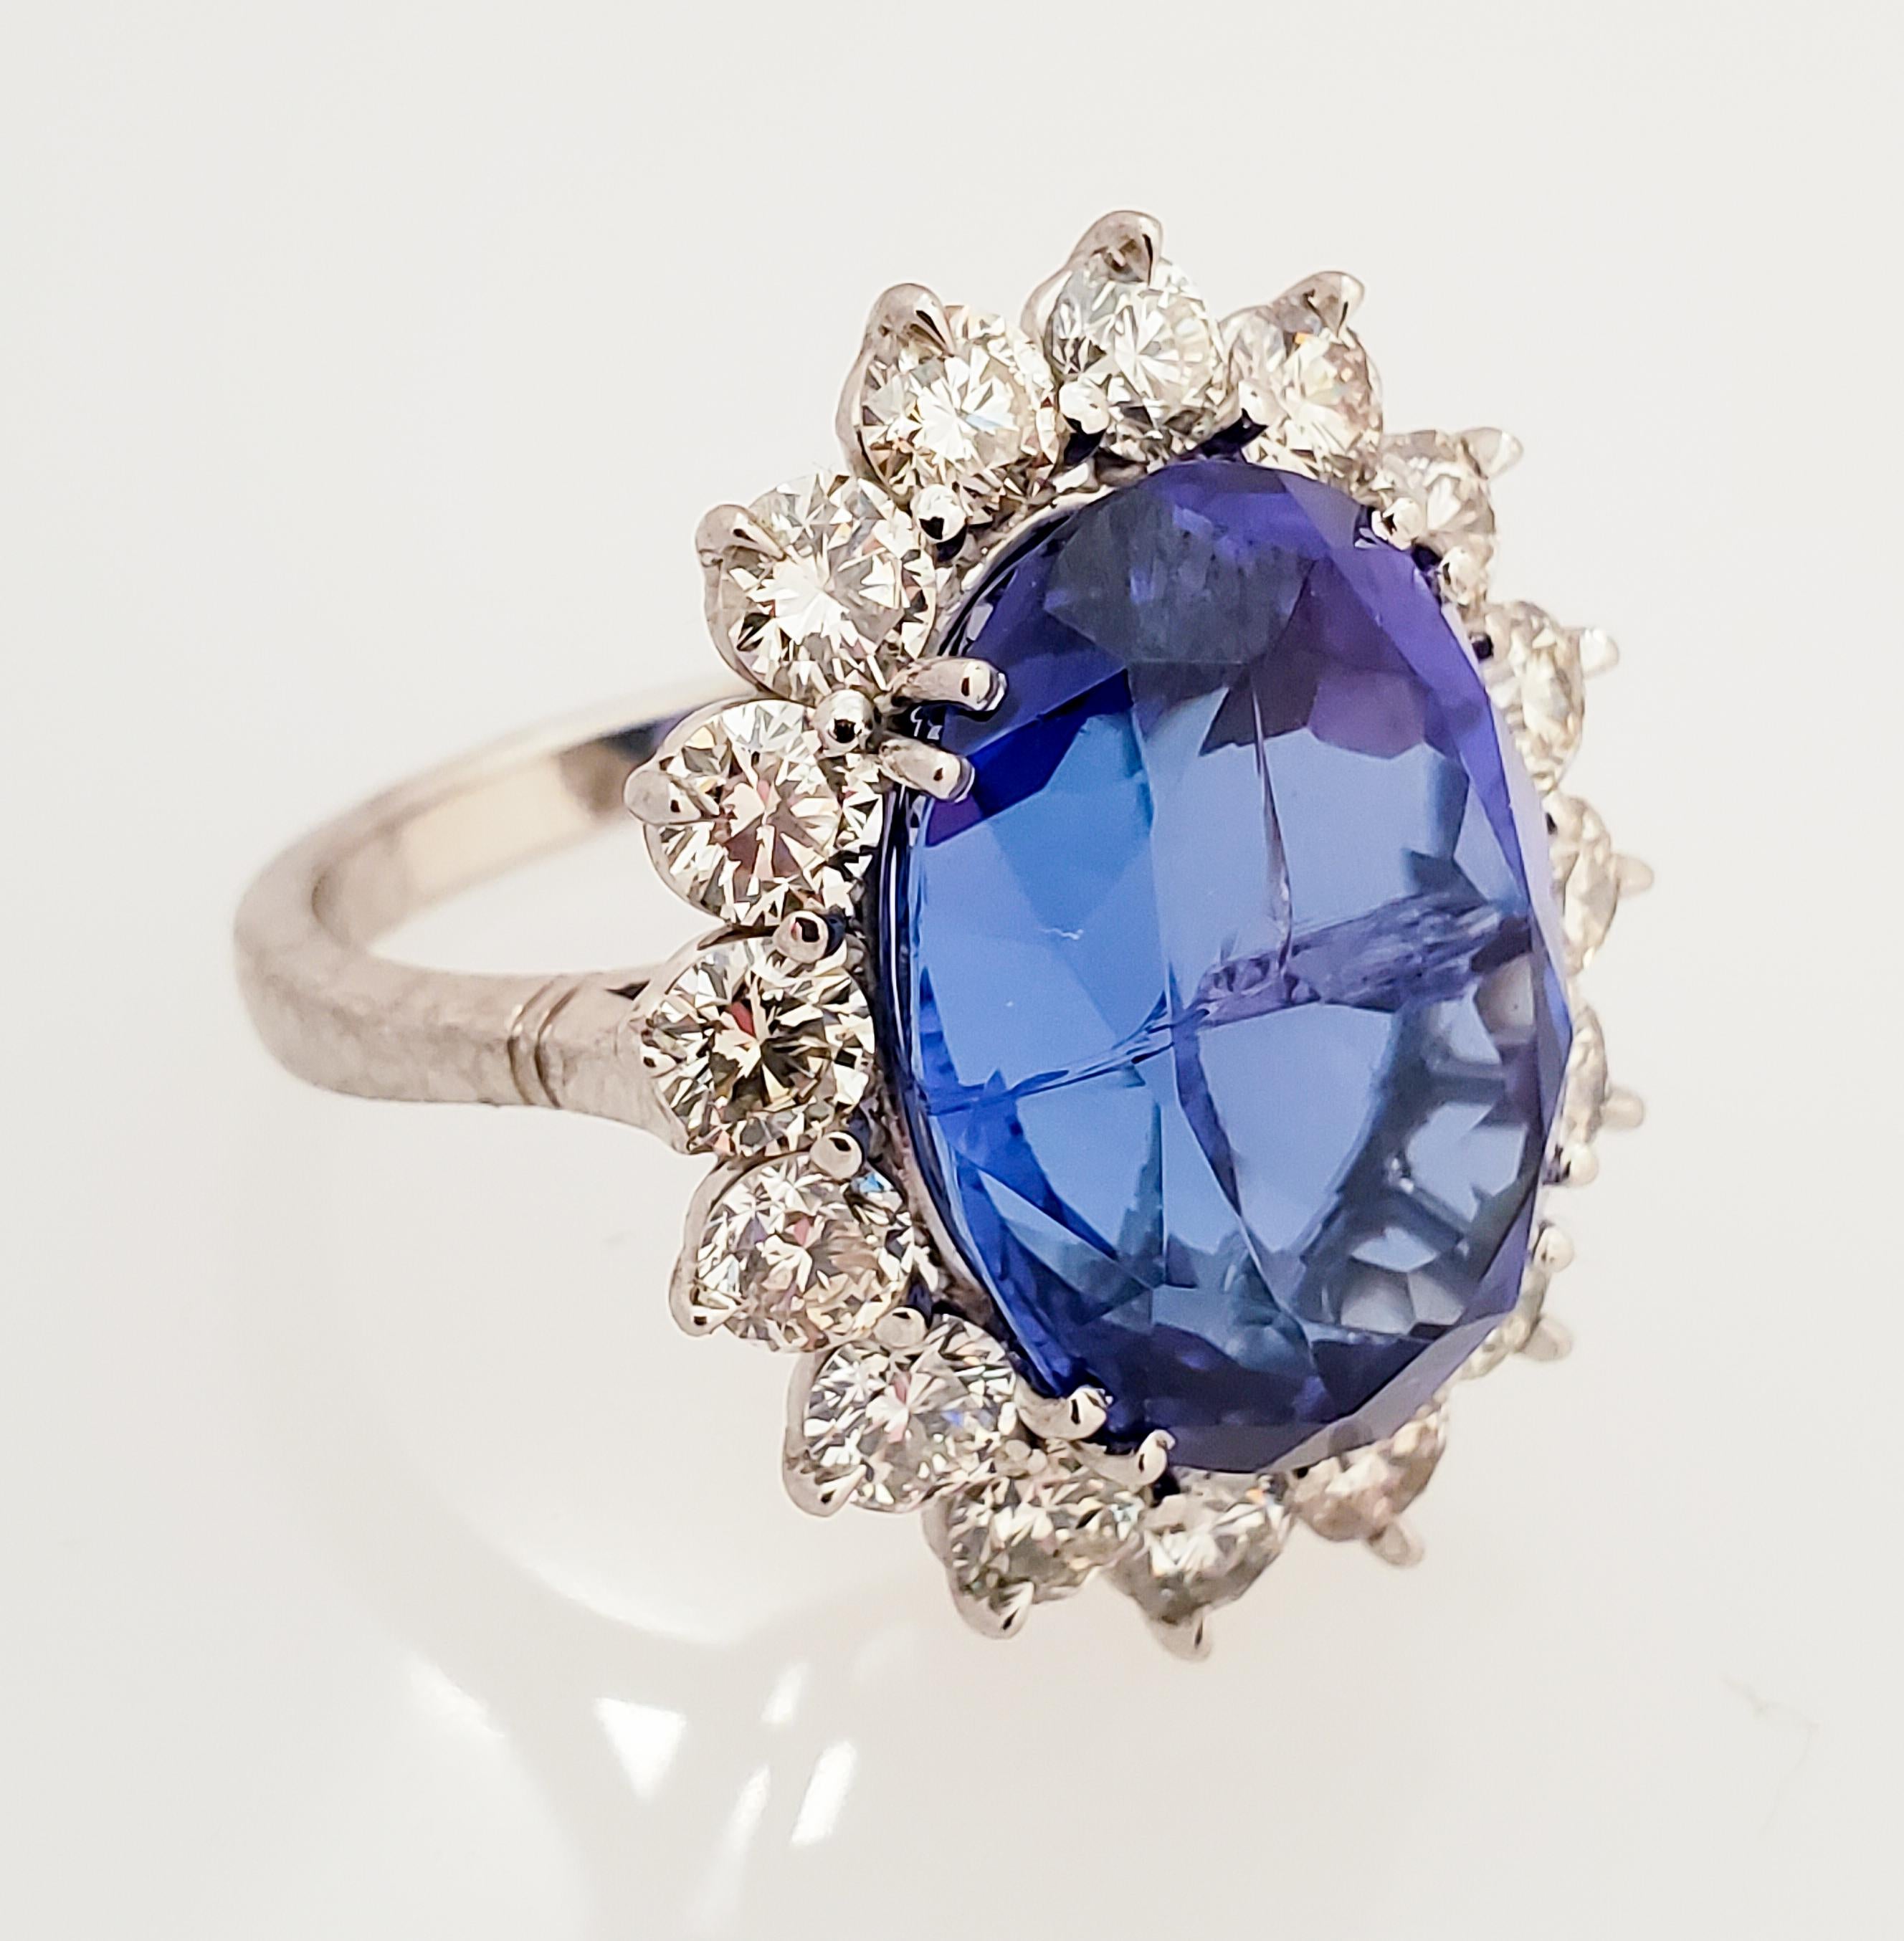 This is a 13.14 carat oval cut fine quality intense bluish-violet tanzanite in a secure double prong setting. The gem source is near the foothills of Mt. Kilimanjaro in Tanzania. Its color is vivid and vibrant; its transparency and luster are